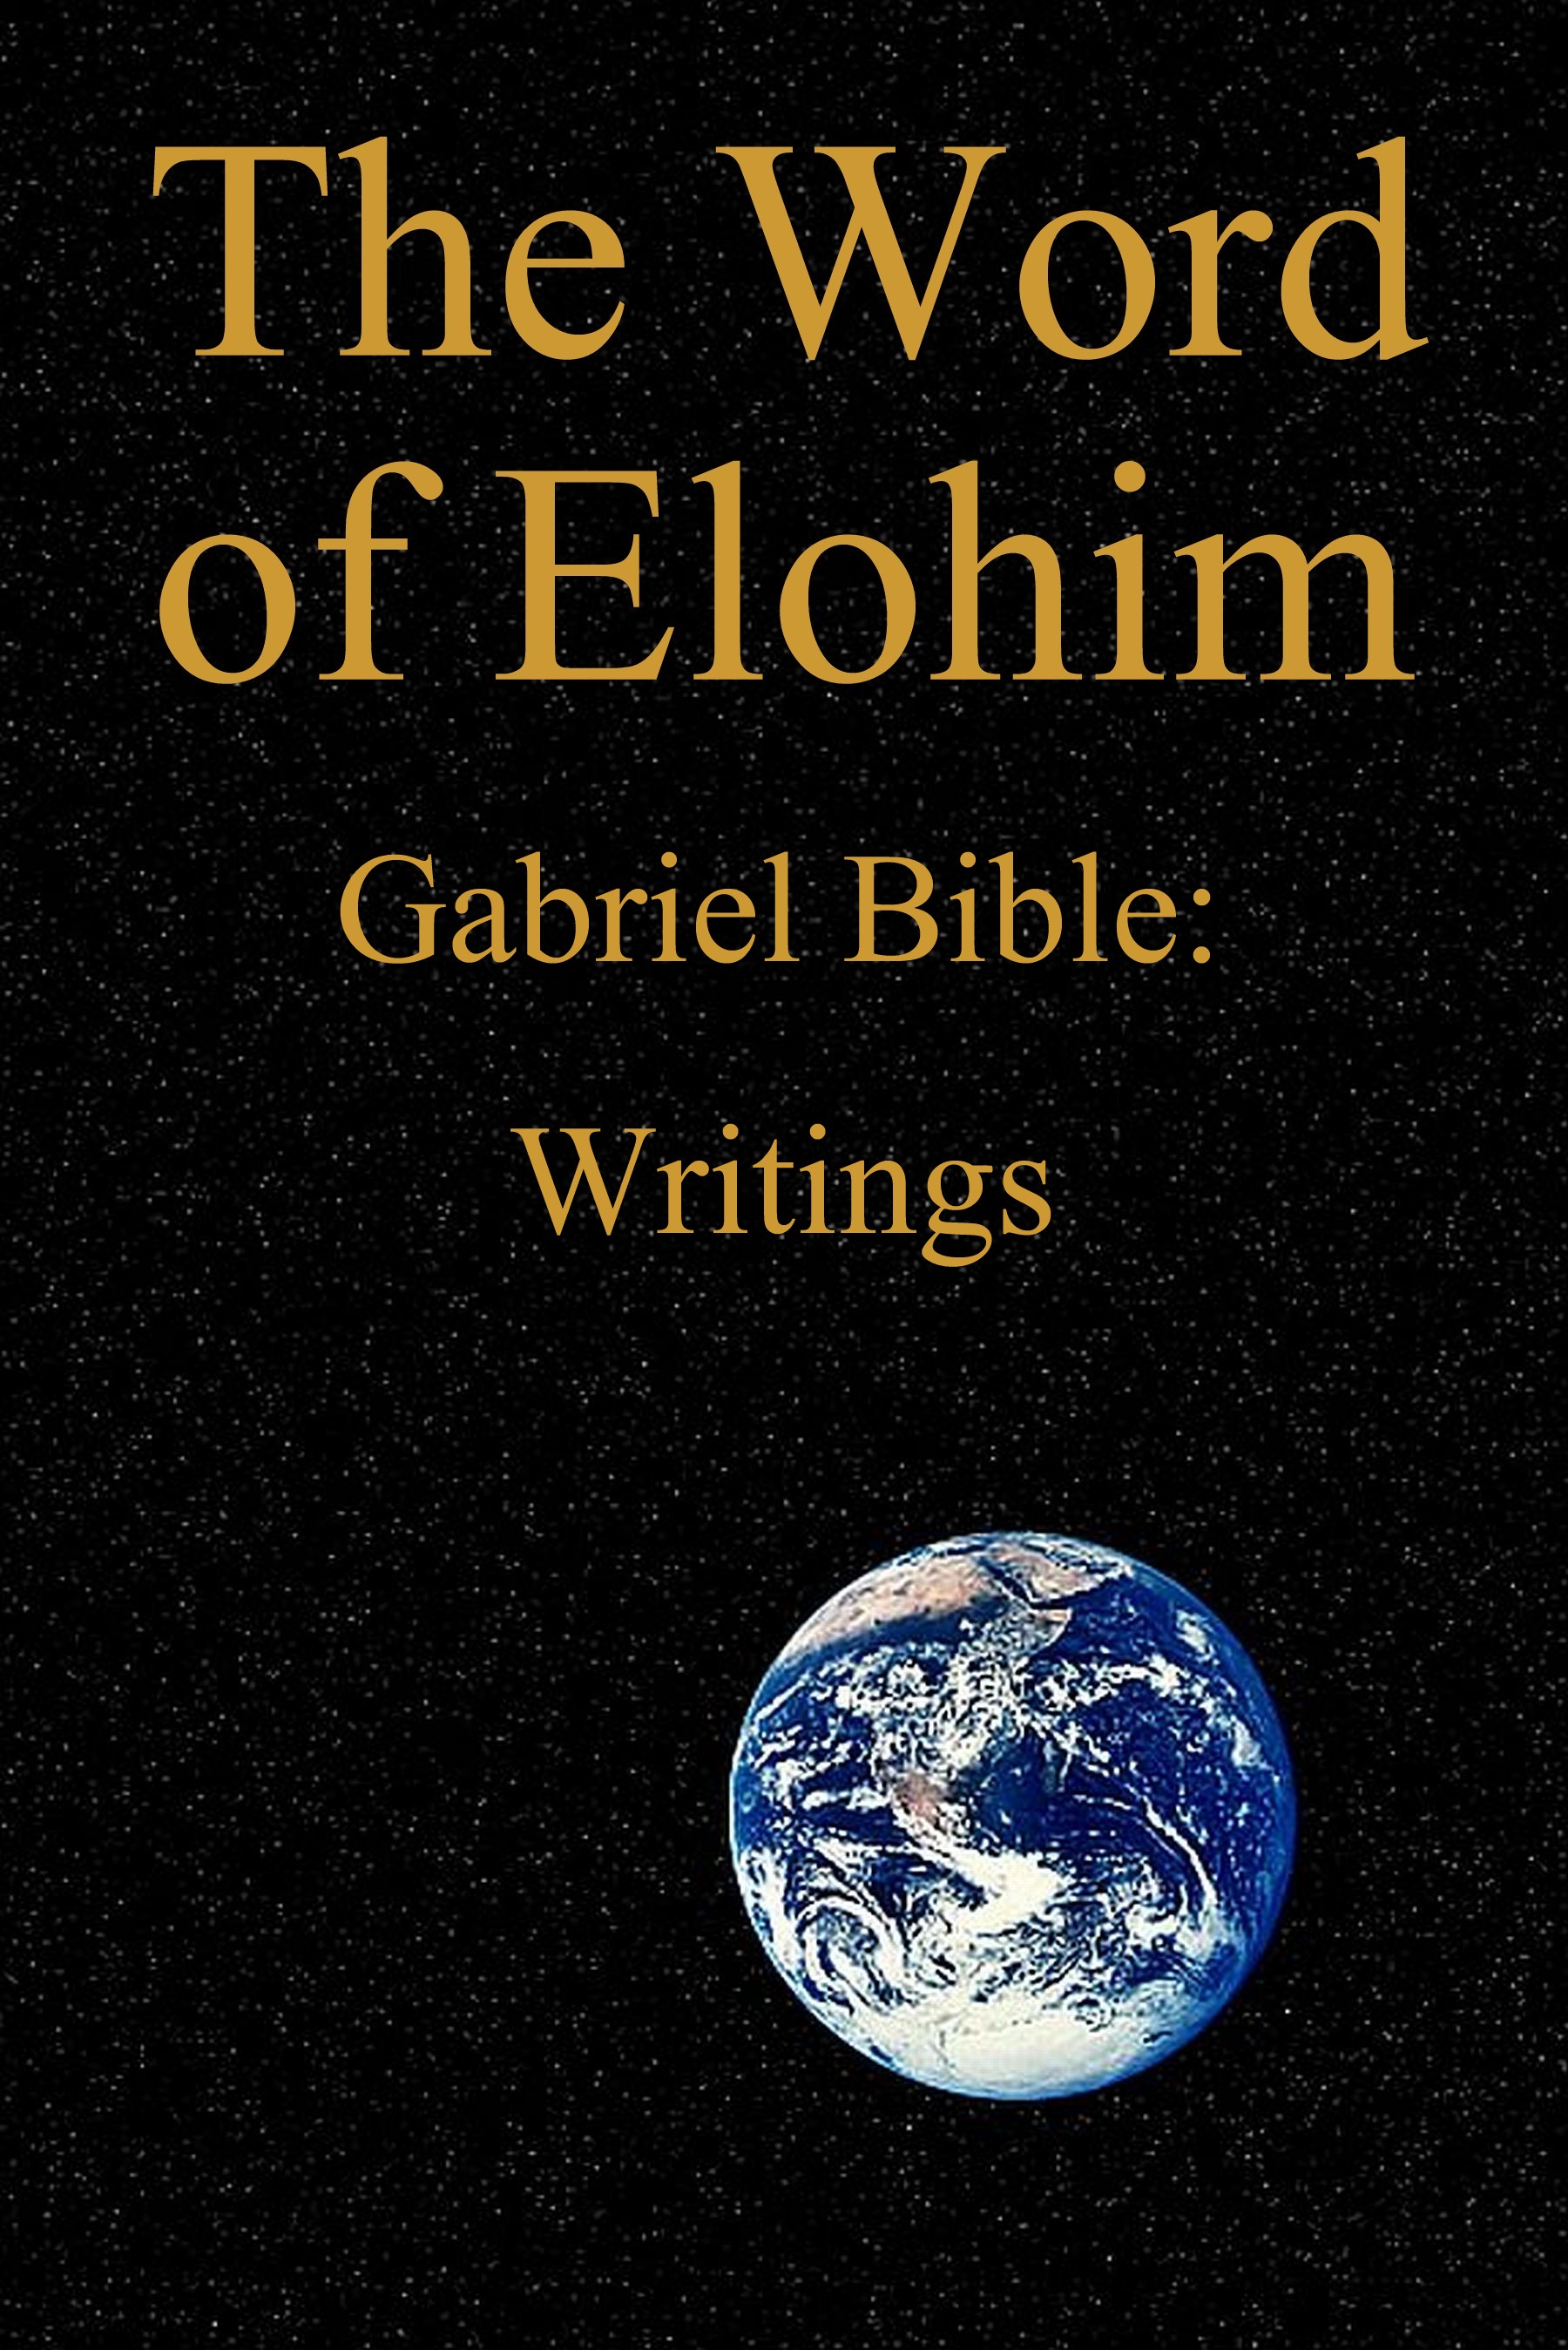 The Word of Elohim